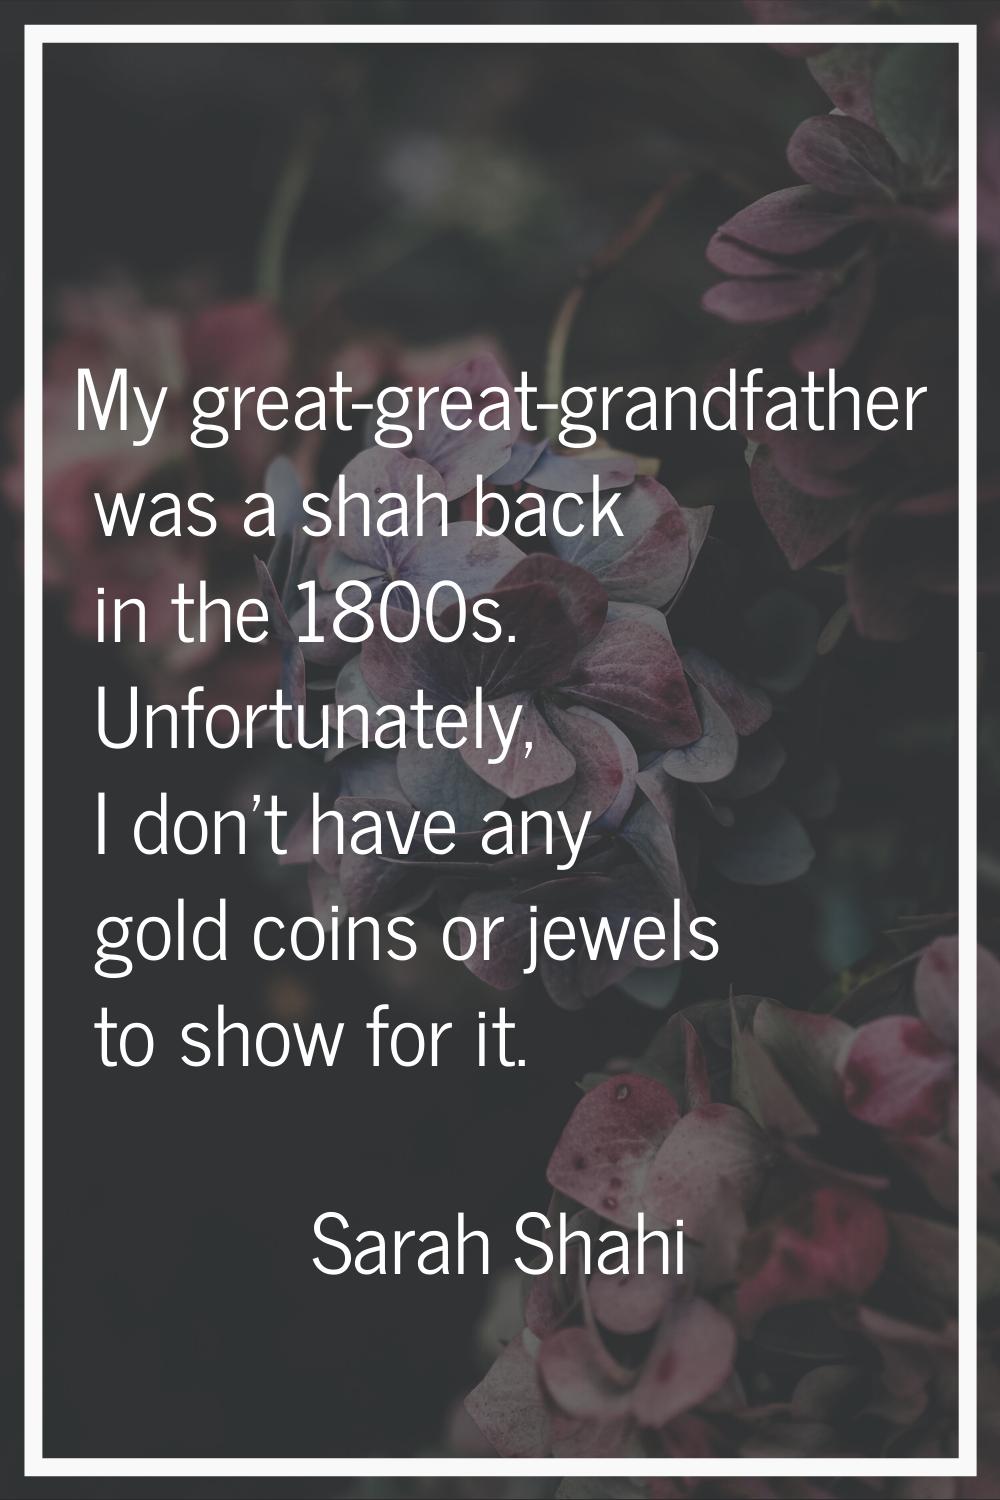 My great-great-grandfather was a shah back in the 1800s. Unfortunately, I don't have any gold coins